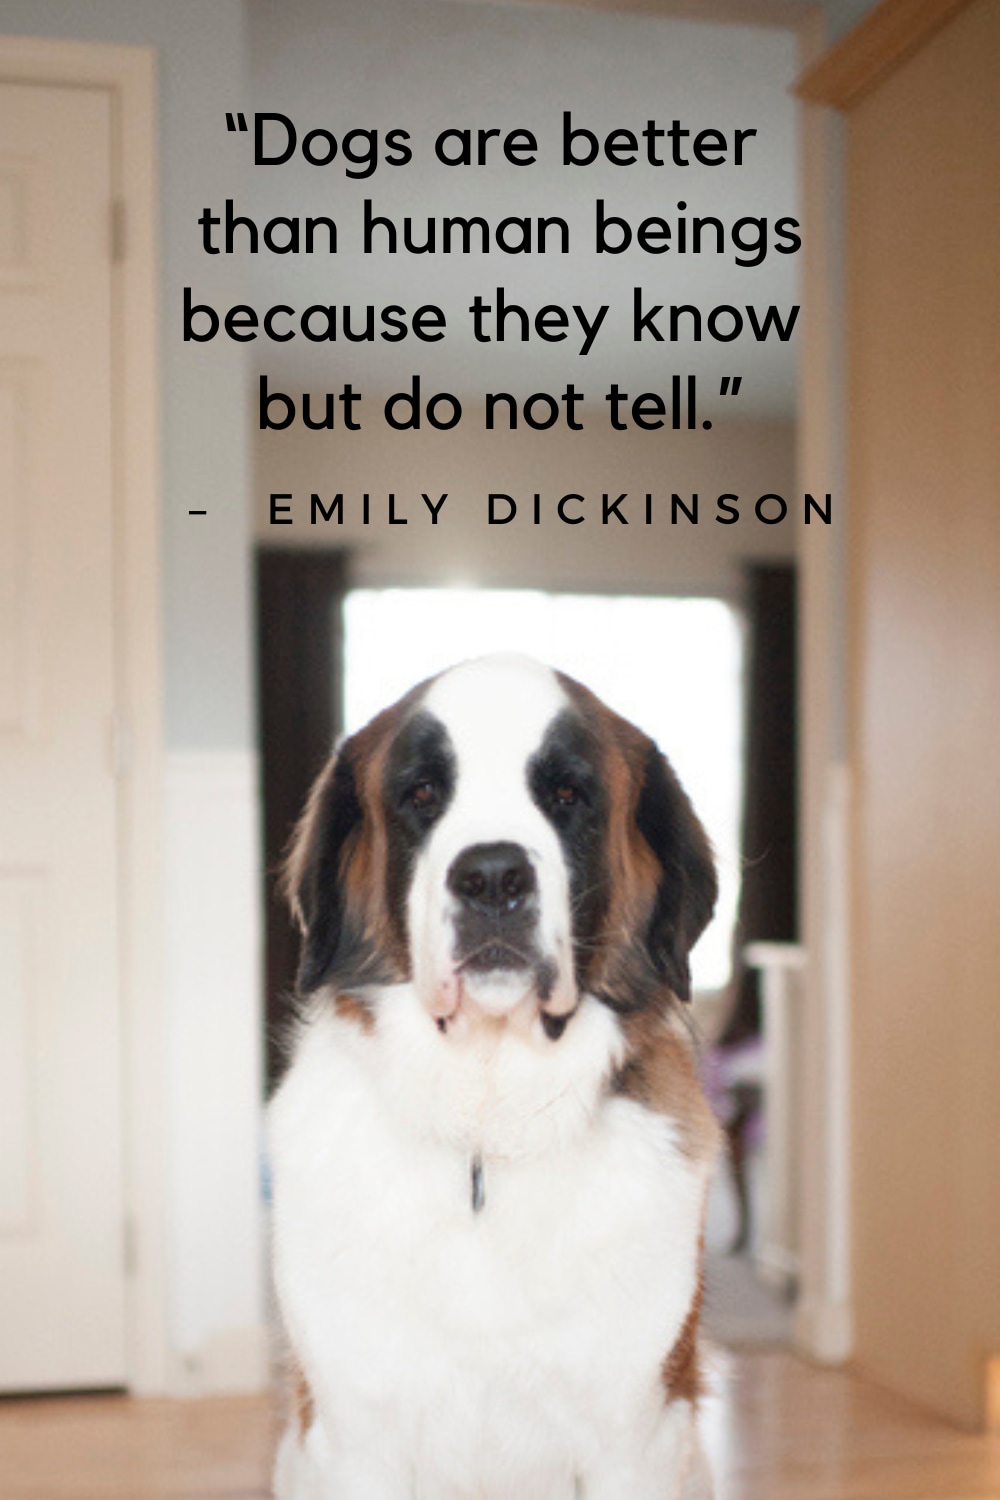 Quotes for dog lovers